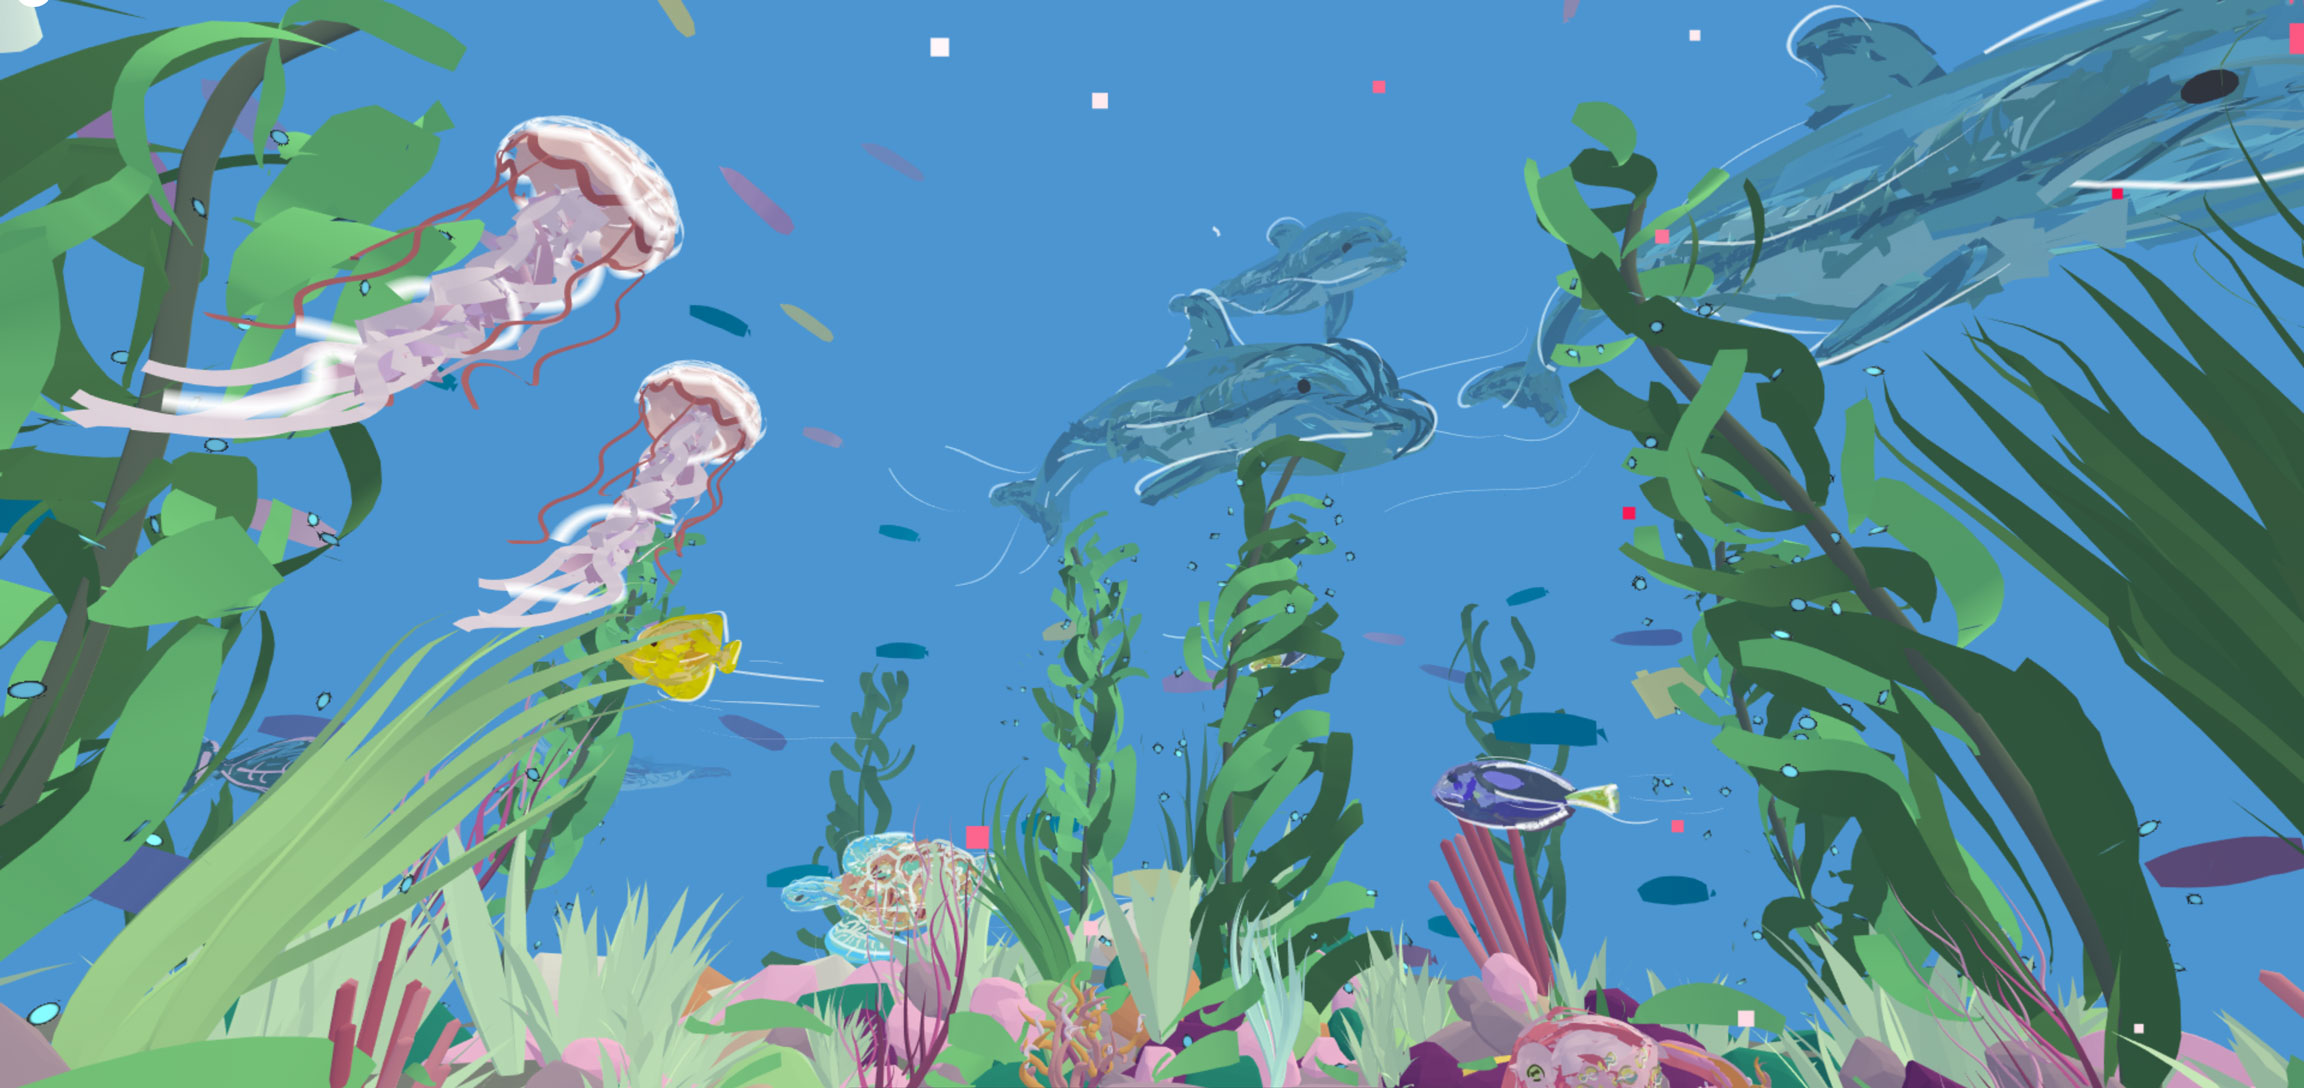 Underwater scenery of jellyfish, dolphins, fish, coral and plants.